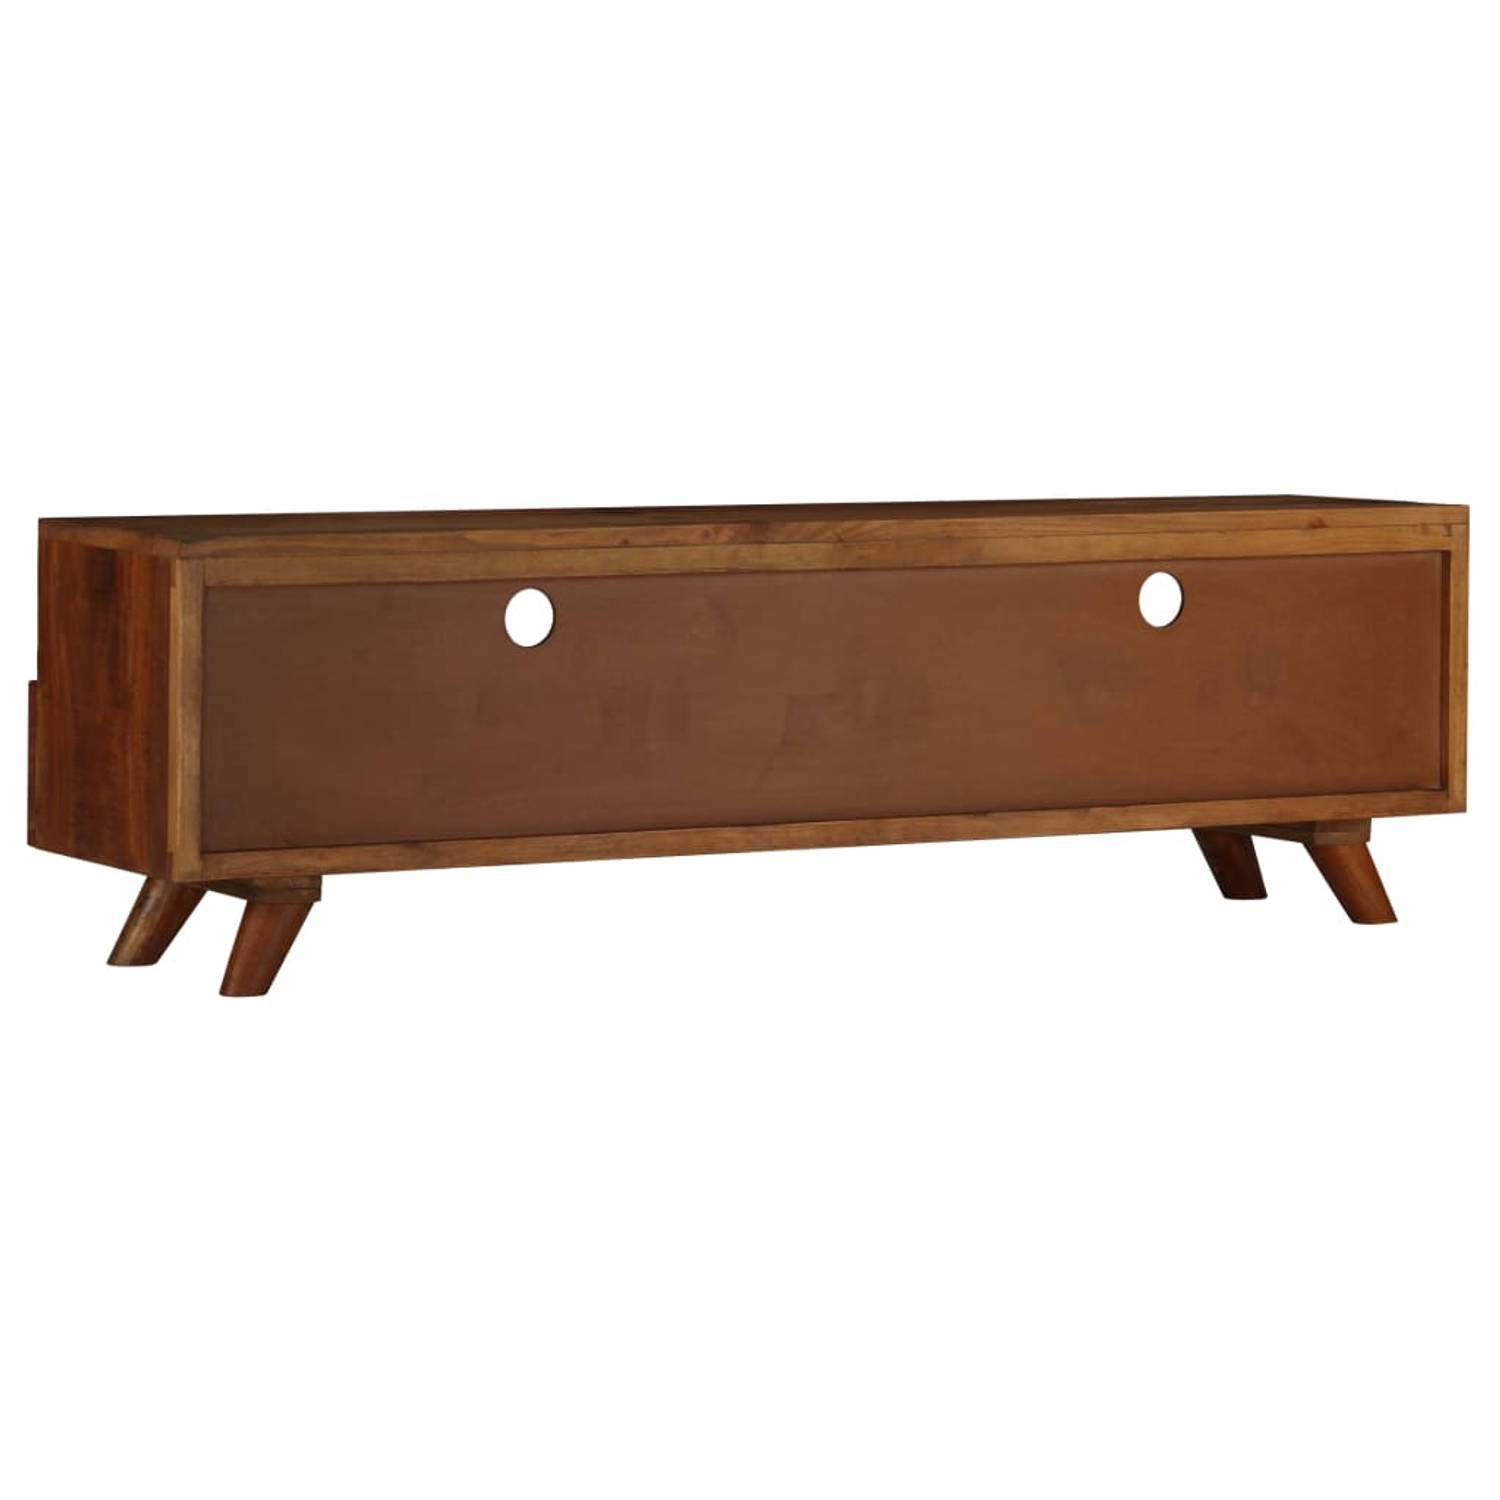 The Living Store Retro TV-kast massief gerecycled hout 140x30x40 cm bruin